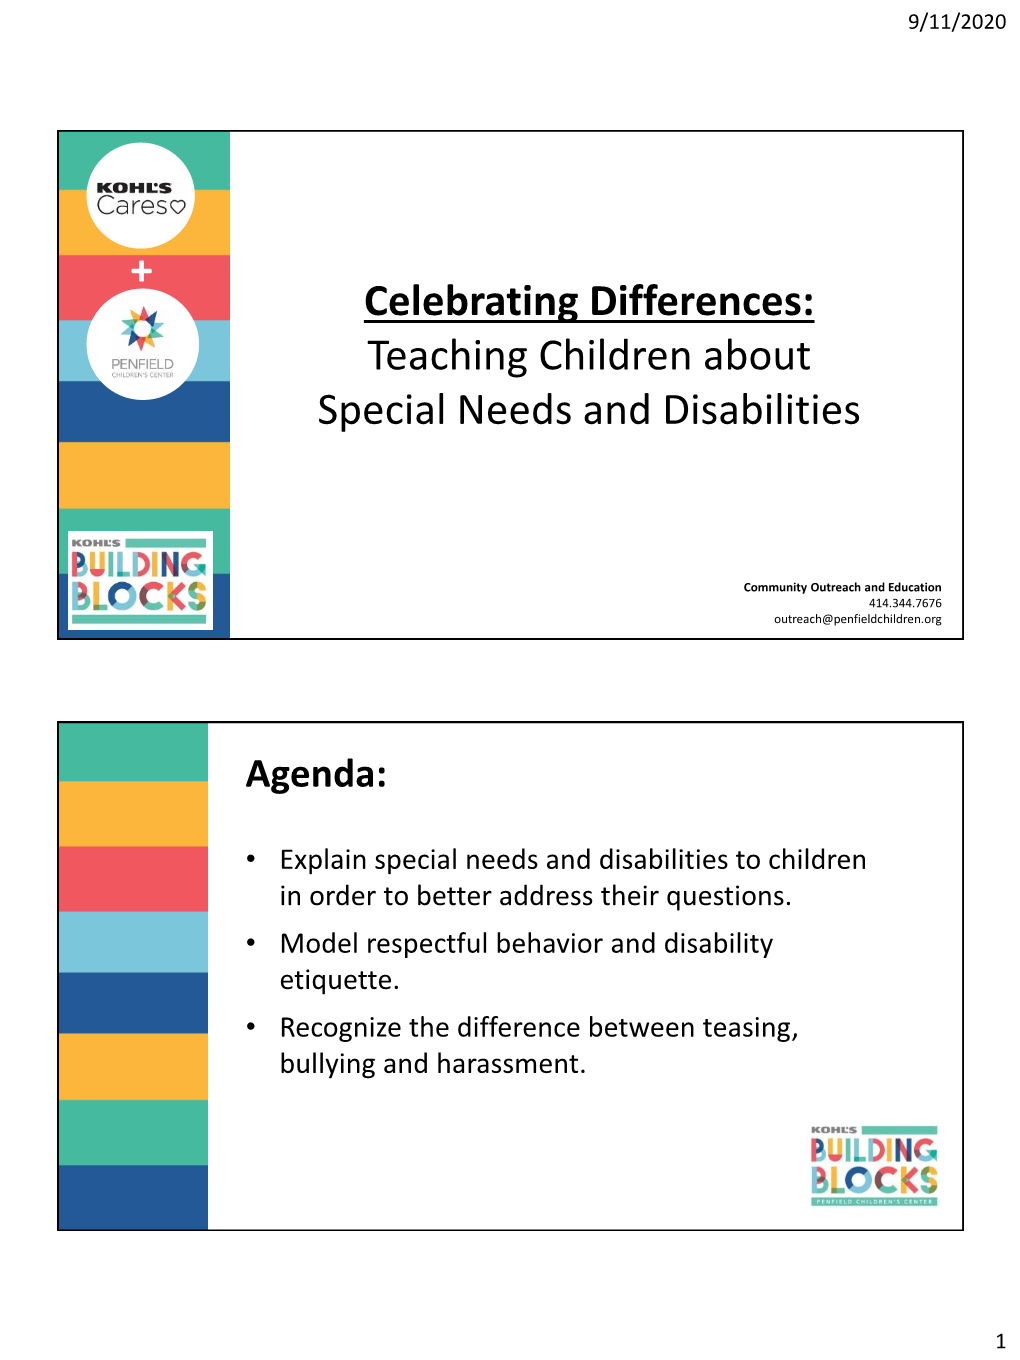 Teaching Children About Special Needs and Disabilities